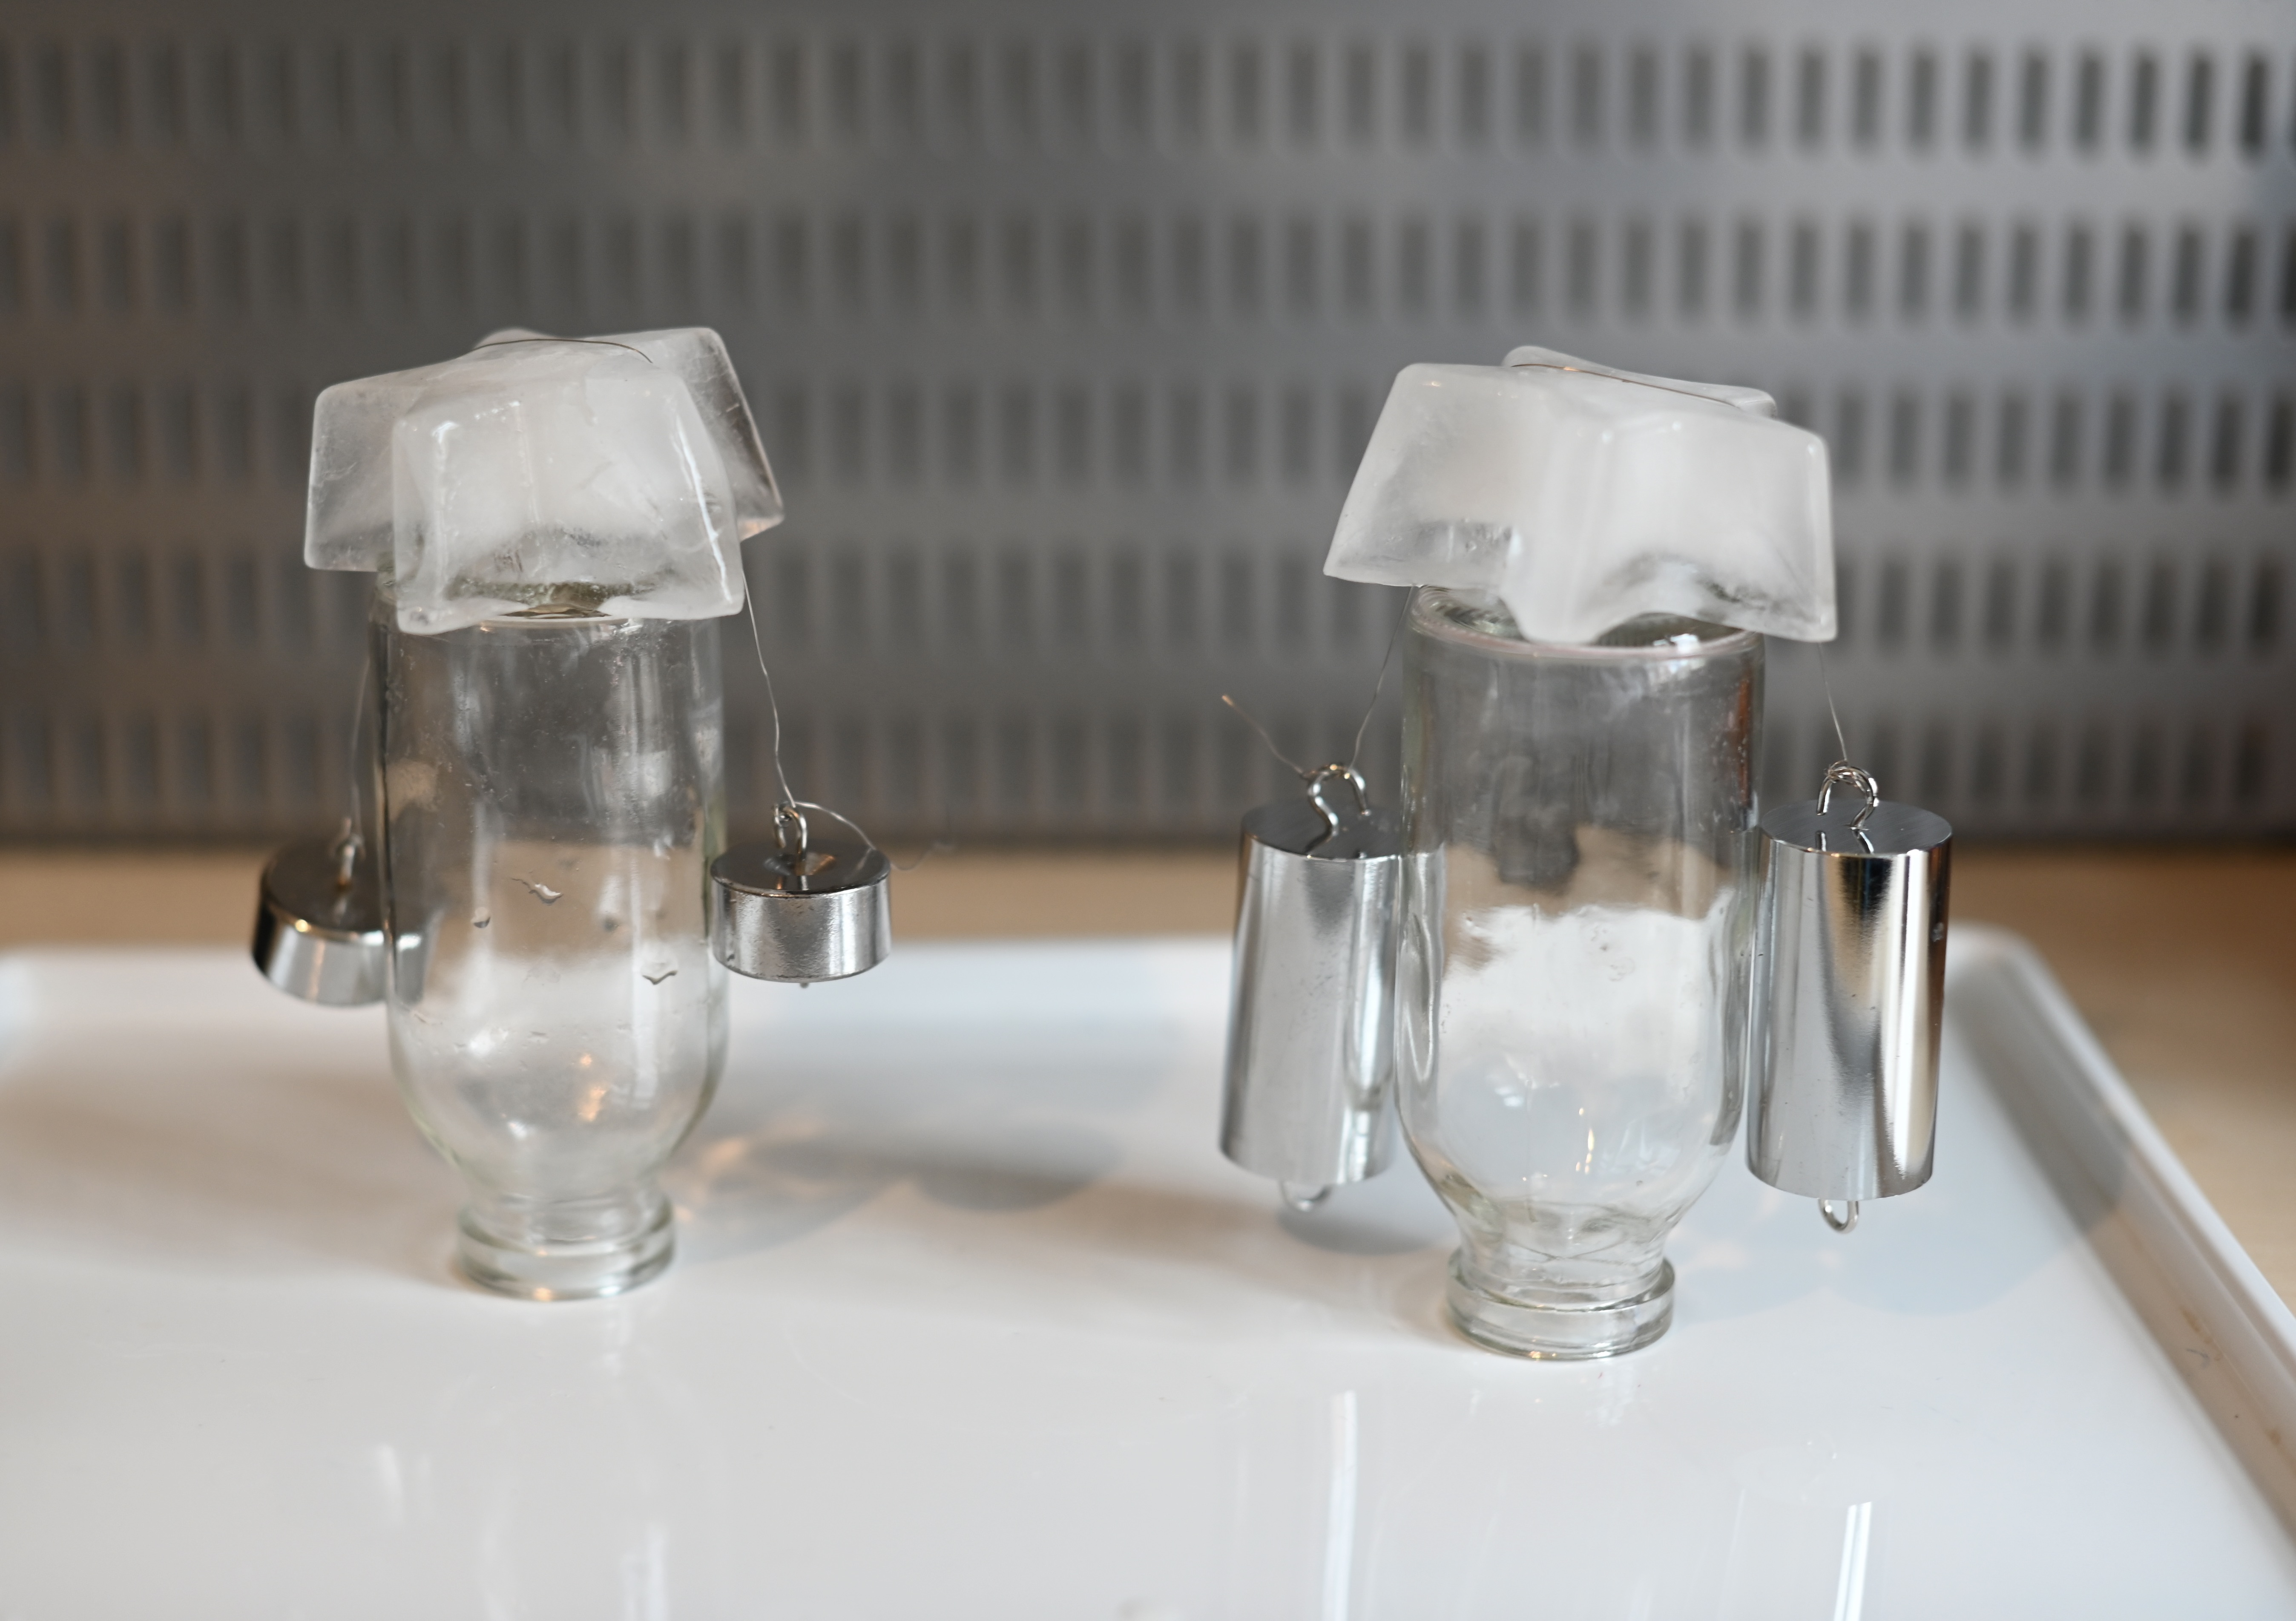 two small containers with an ice cube resting on the top. A thin wire with weights on each end is placed over the ice cube.